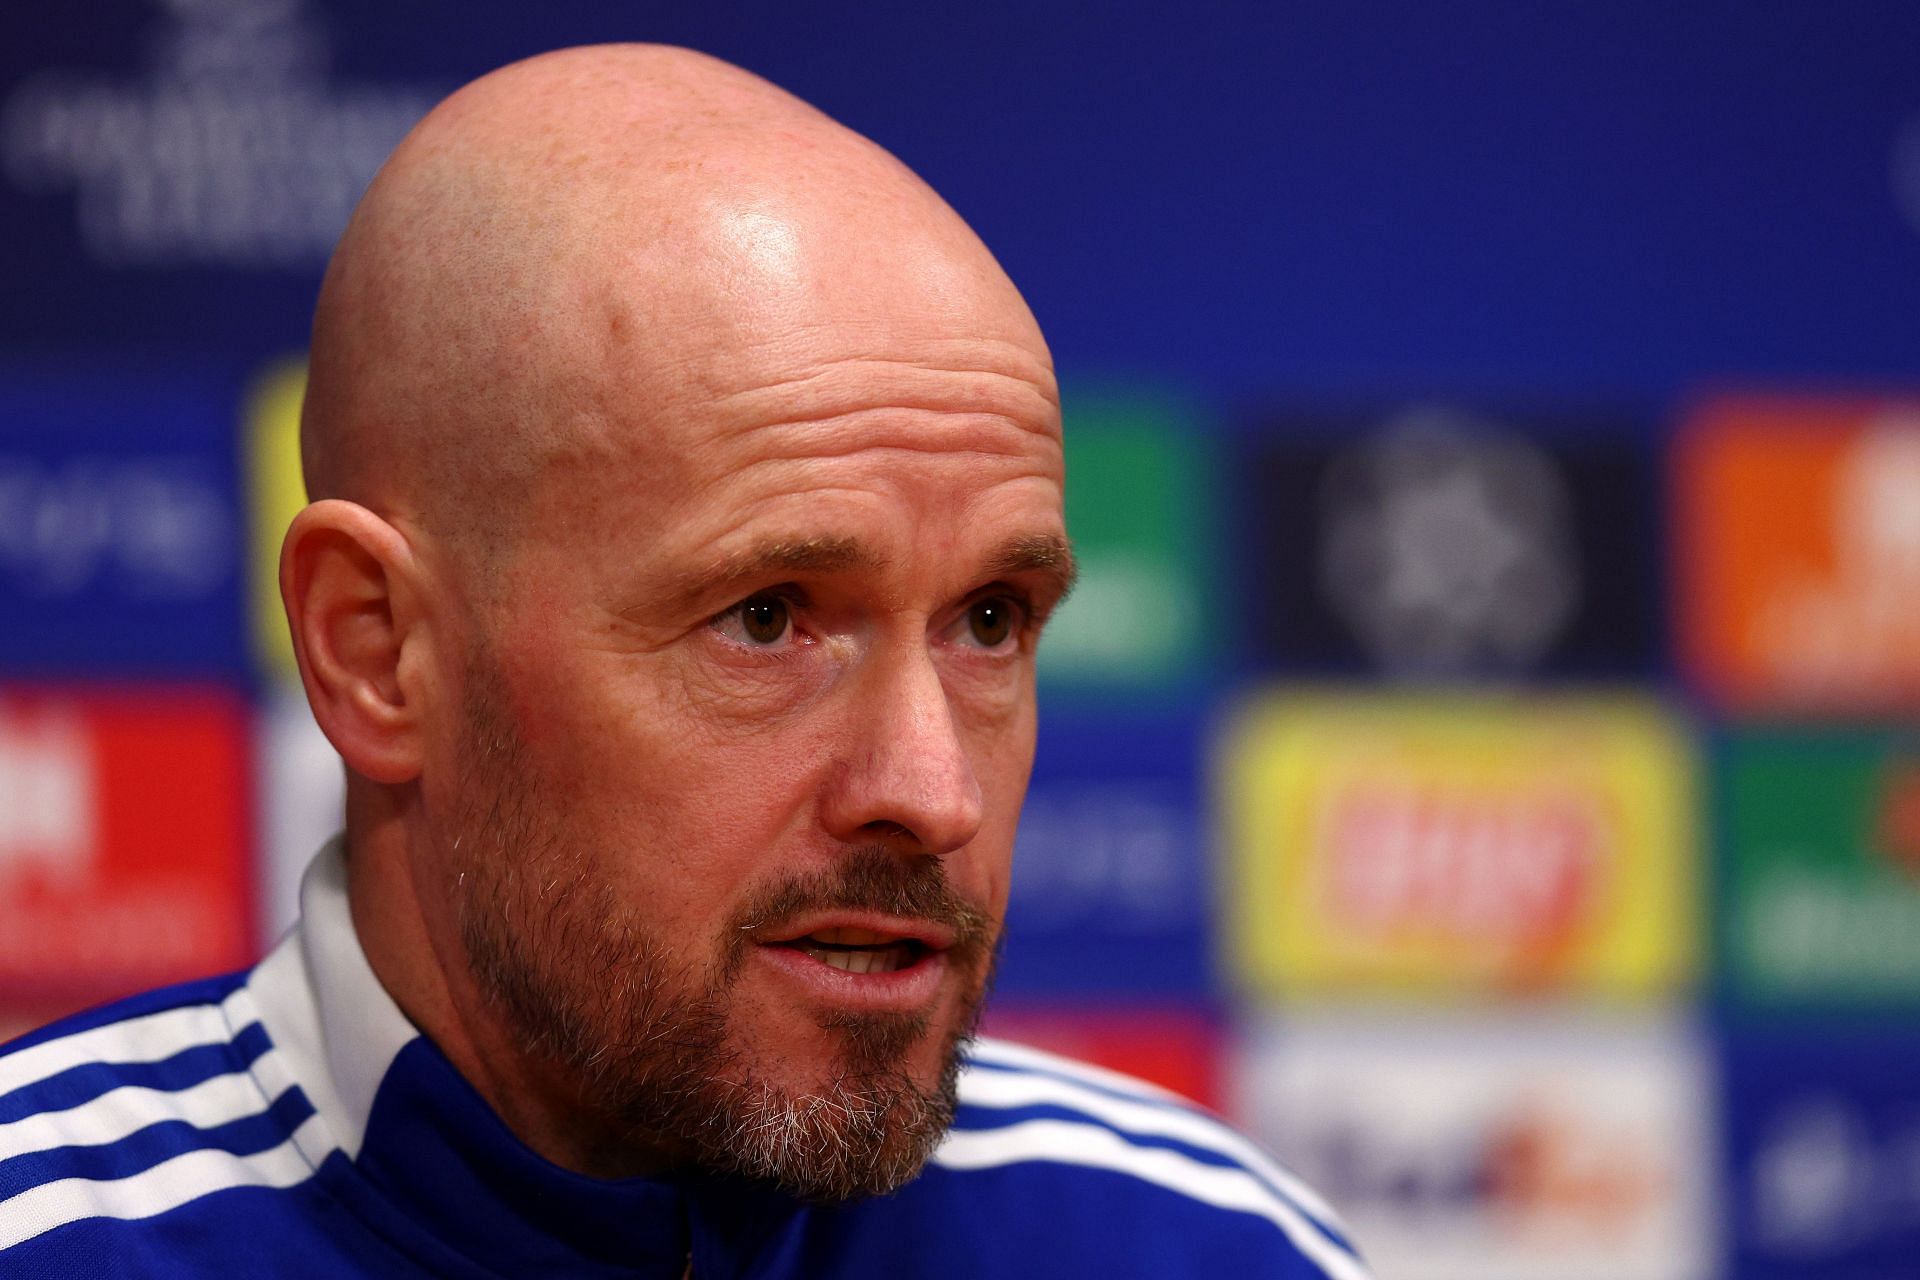 Erik Ten Hag will take charge at Old Trafford over the summer.